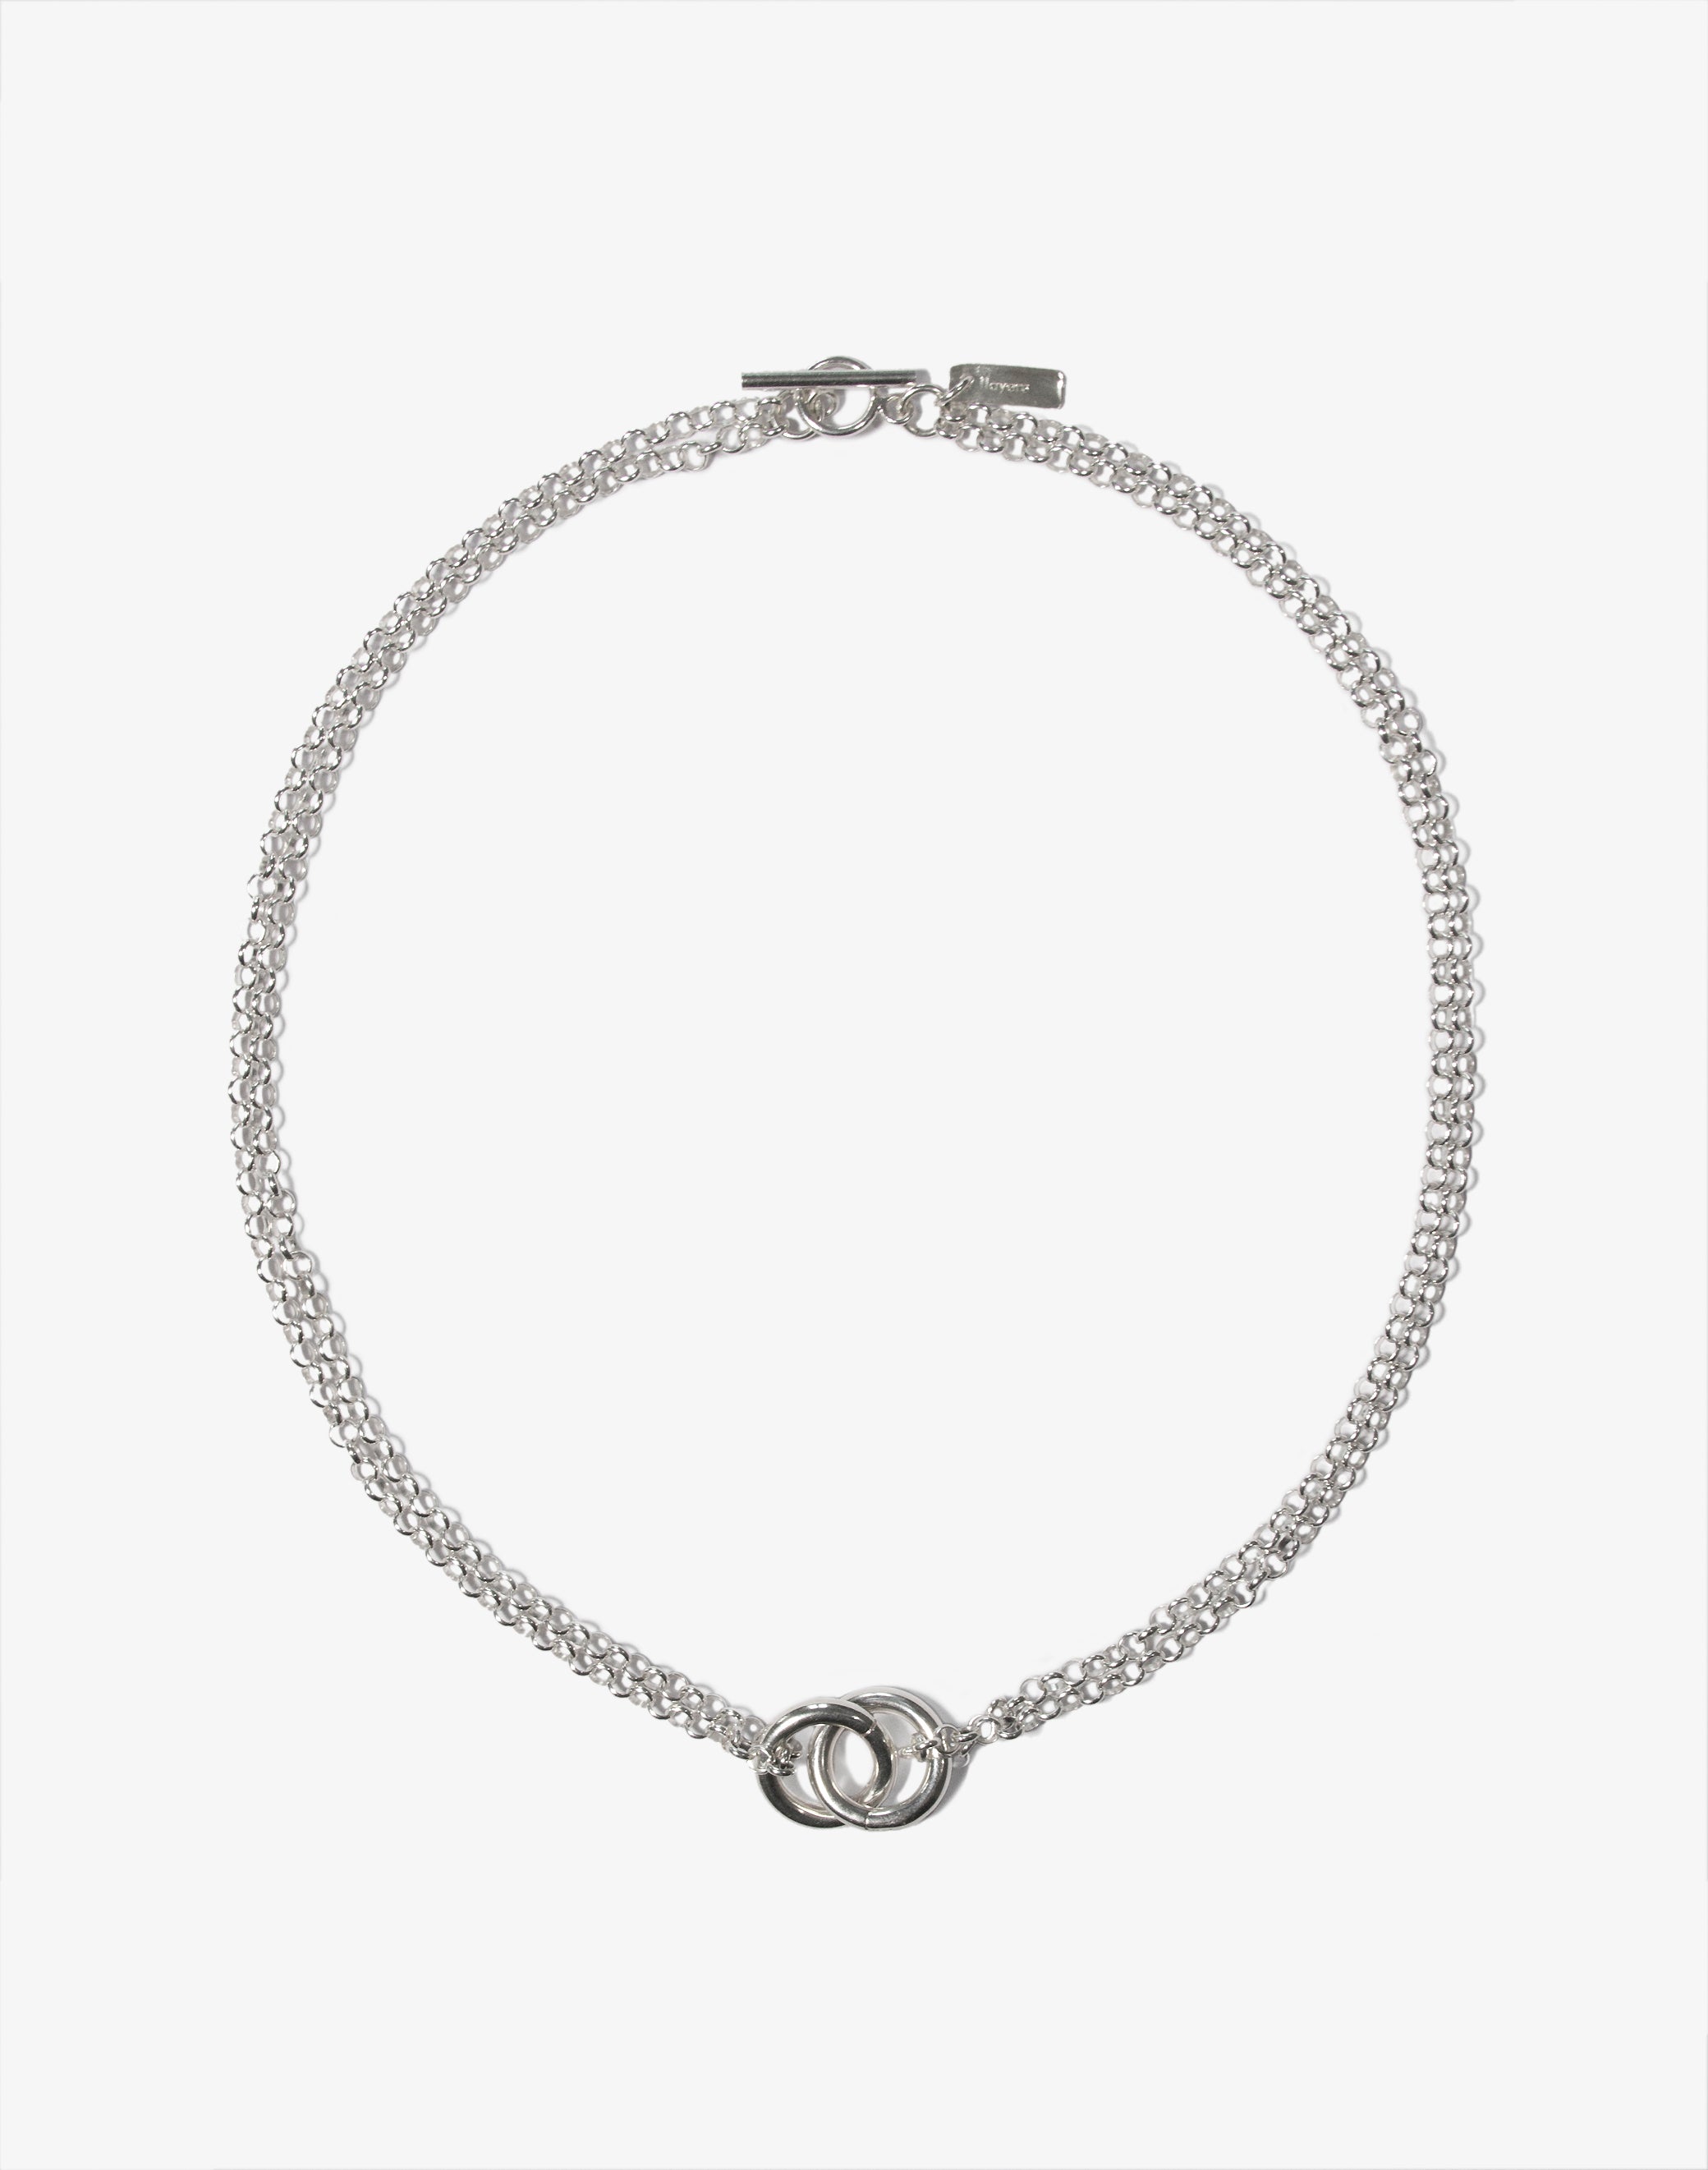 Women silver chain rings choker necklace - Made In Brookyn New York 1